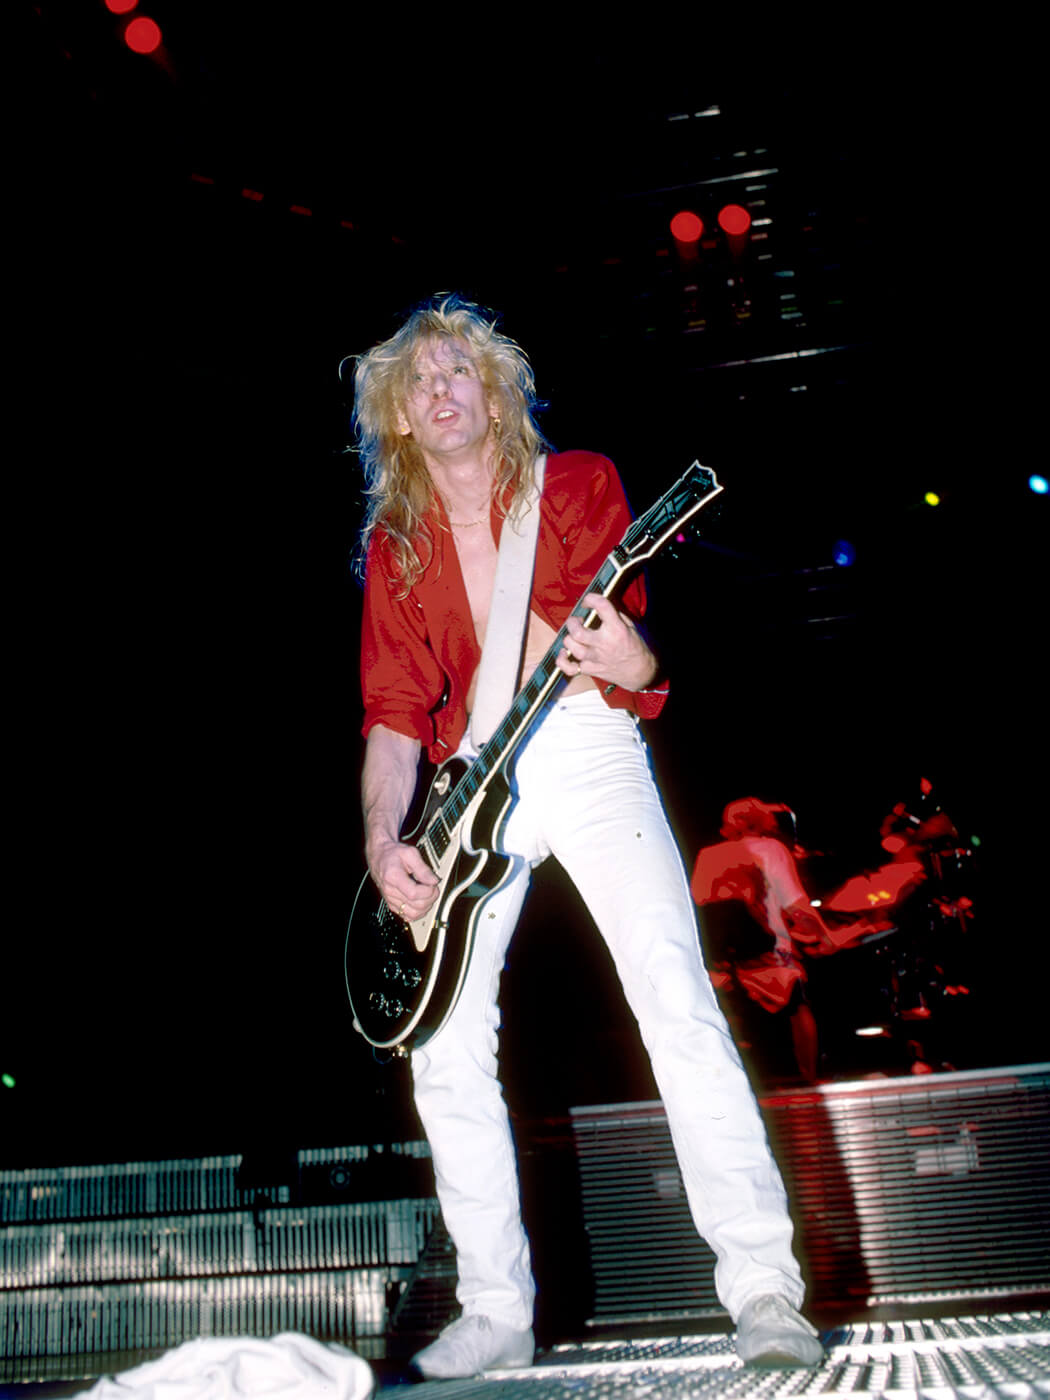 Steve Clark of Def Leppard performing in 1987 with a Les Paul, photo by Ebet Robert/Redferns via Getty Images